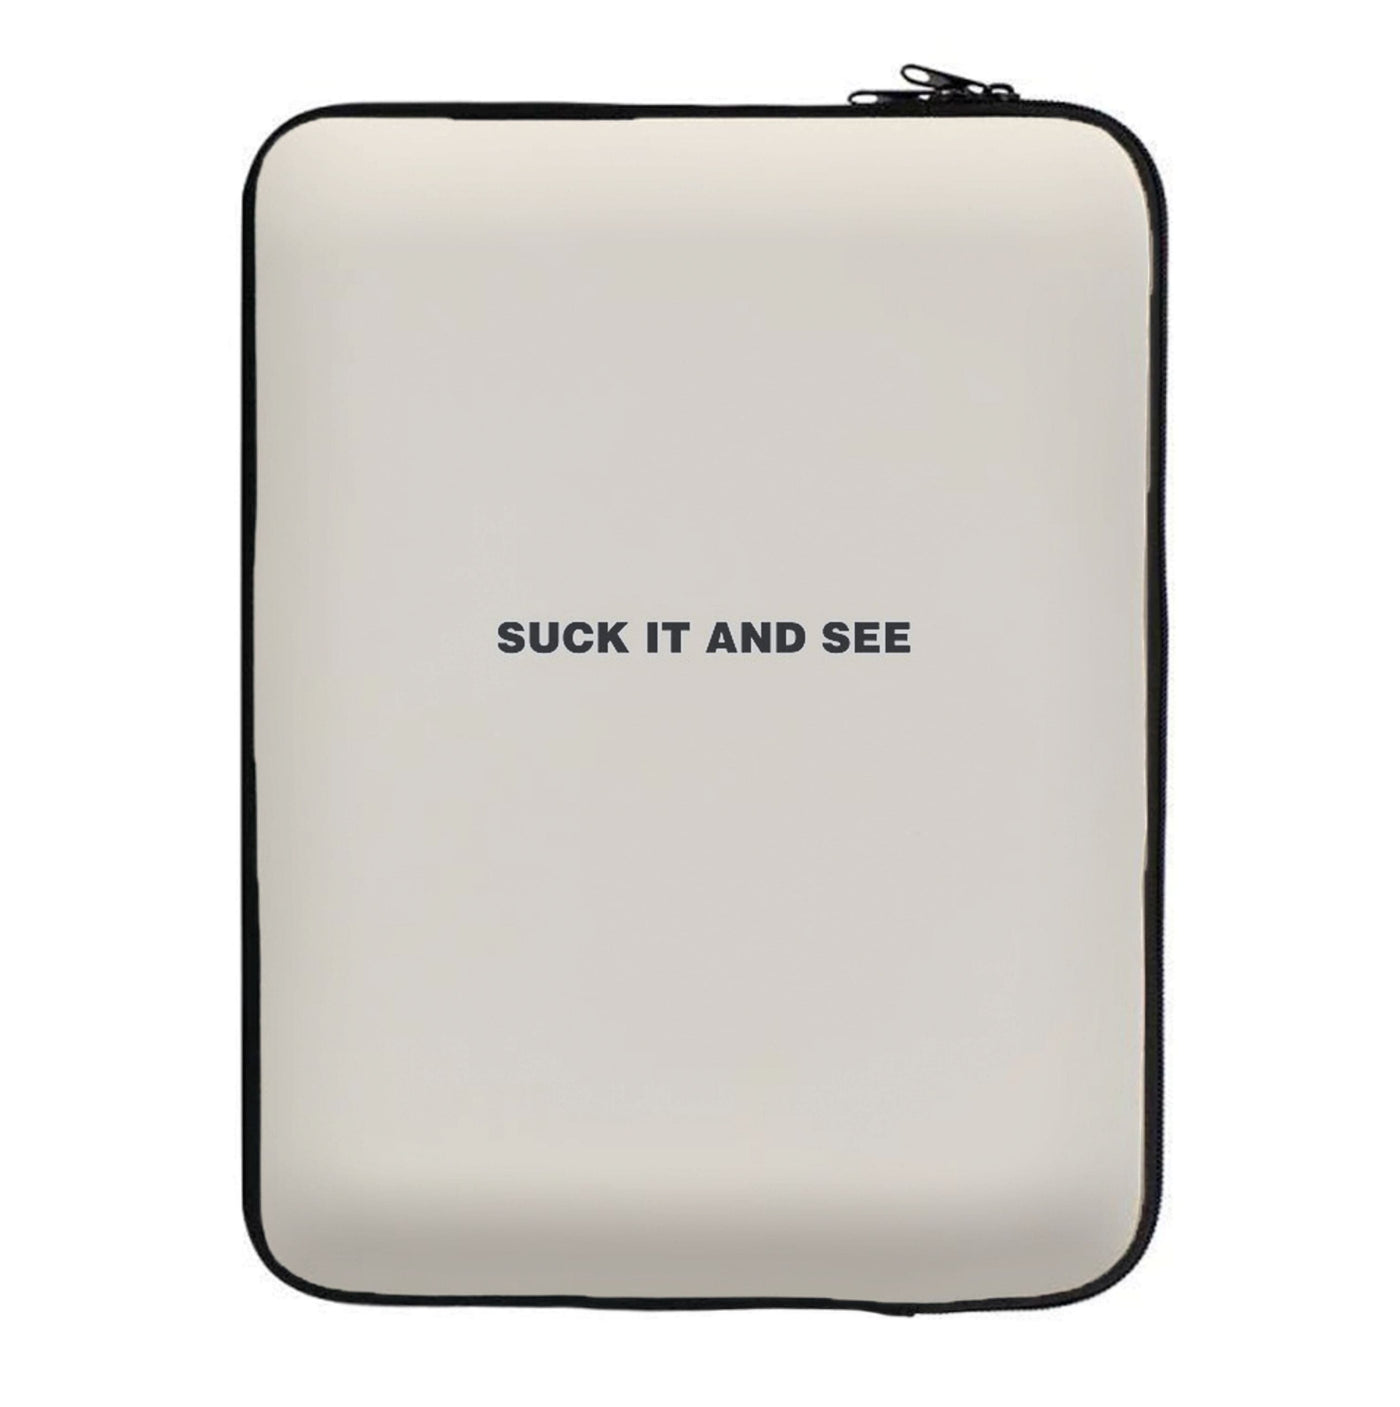 Suck It and See - Arctic Monkeys Laptop Sleeve